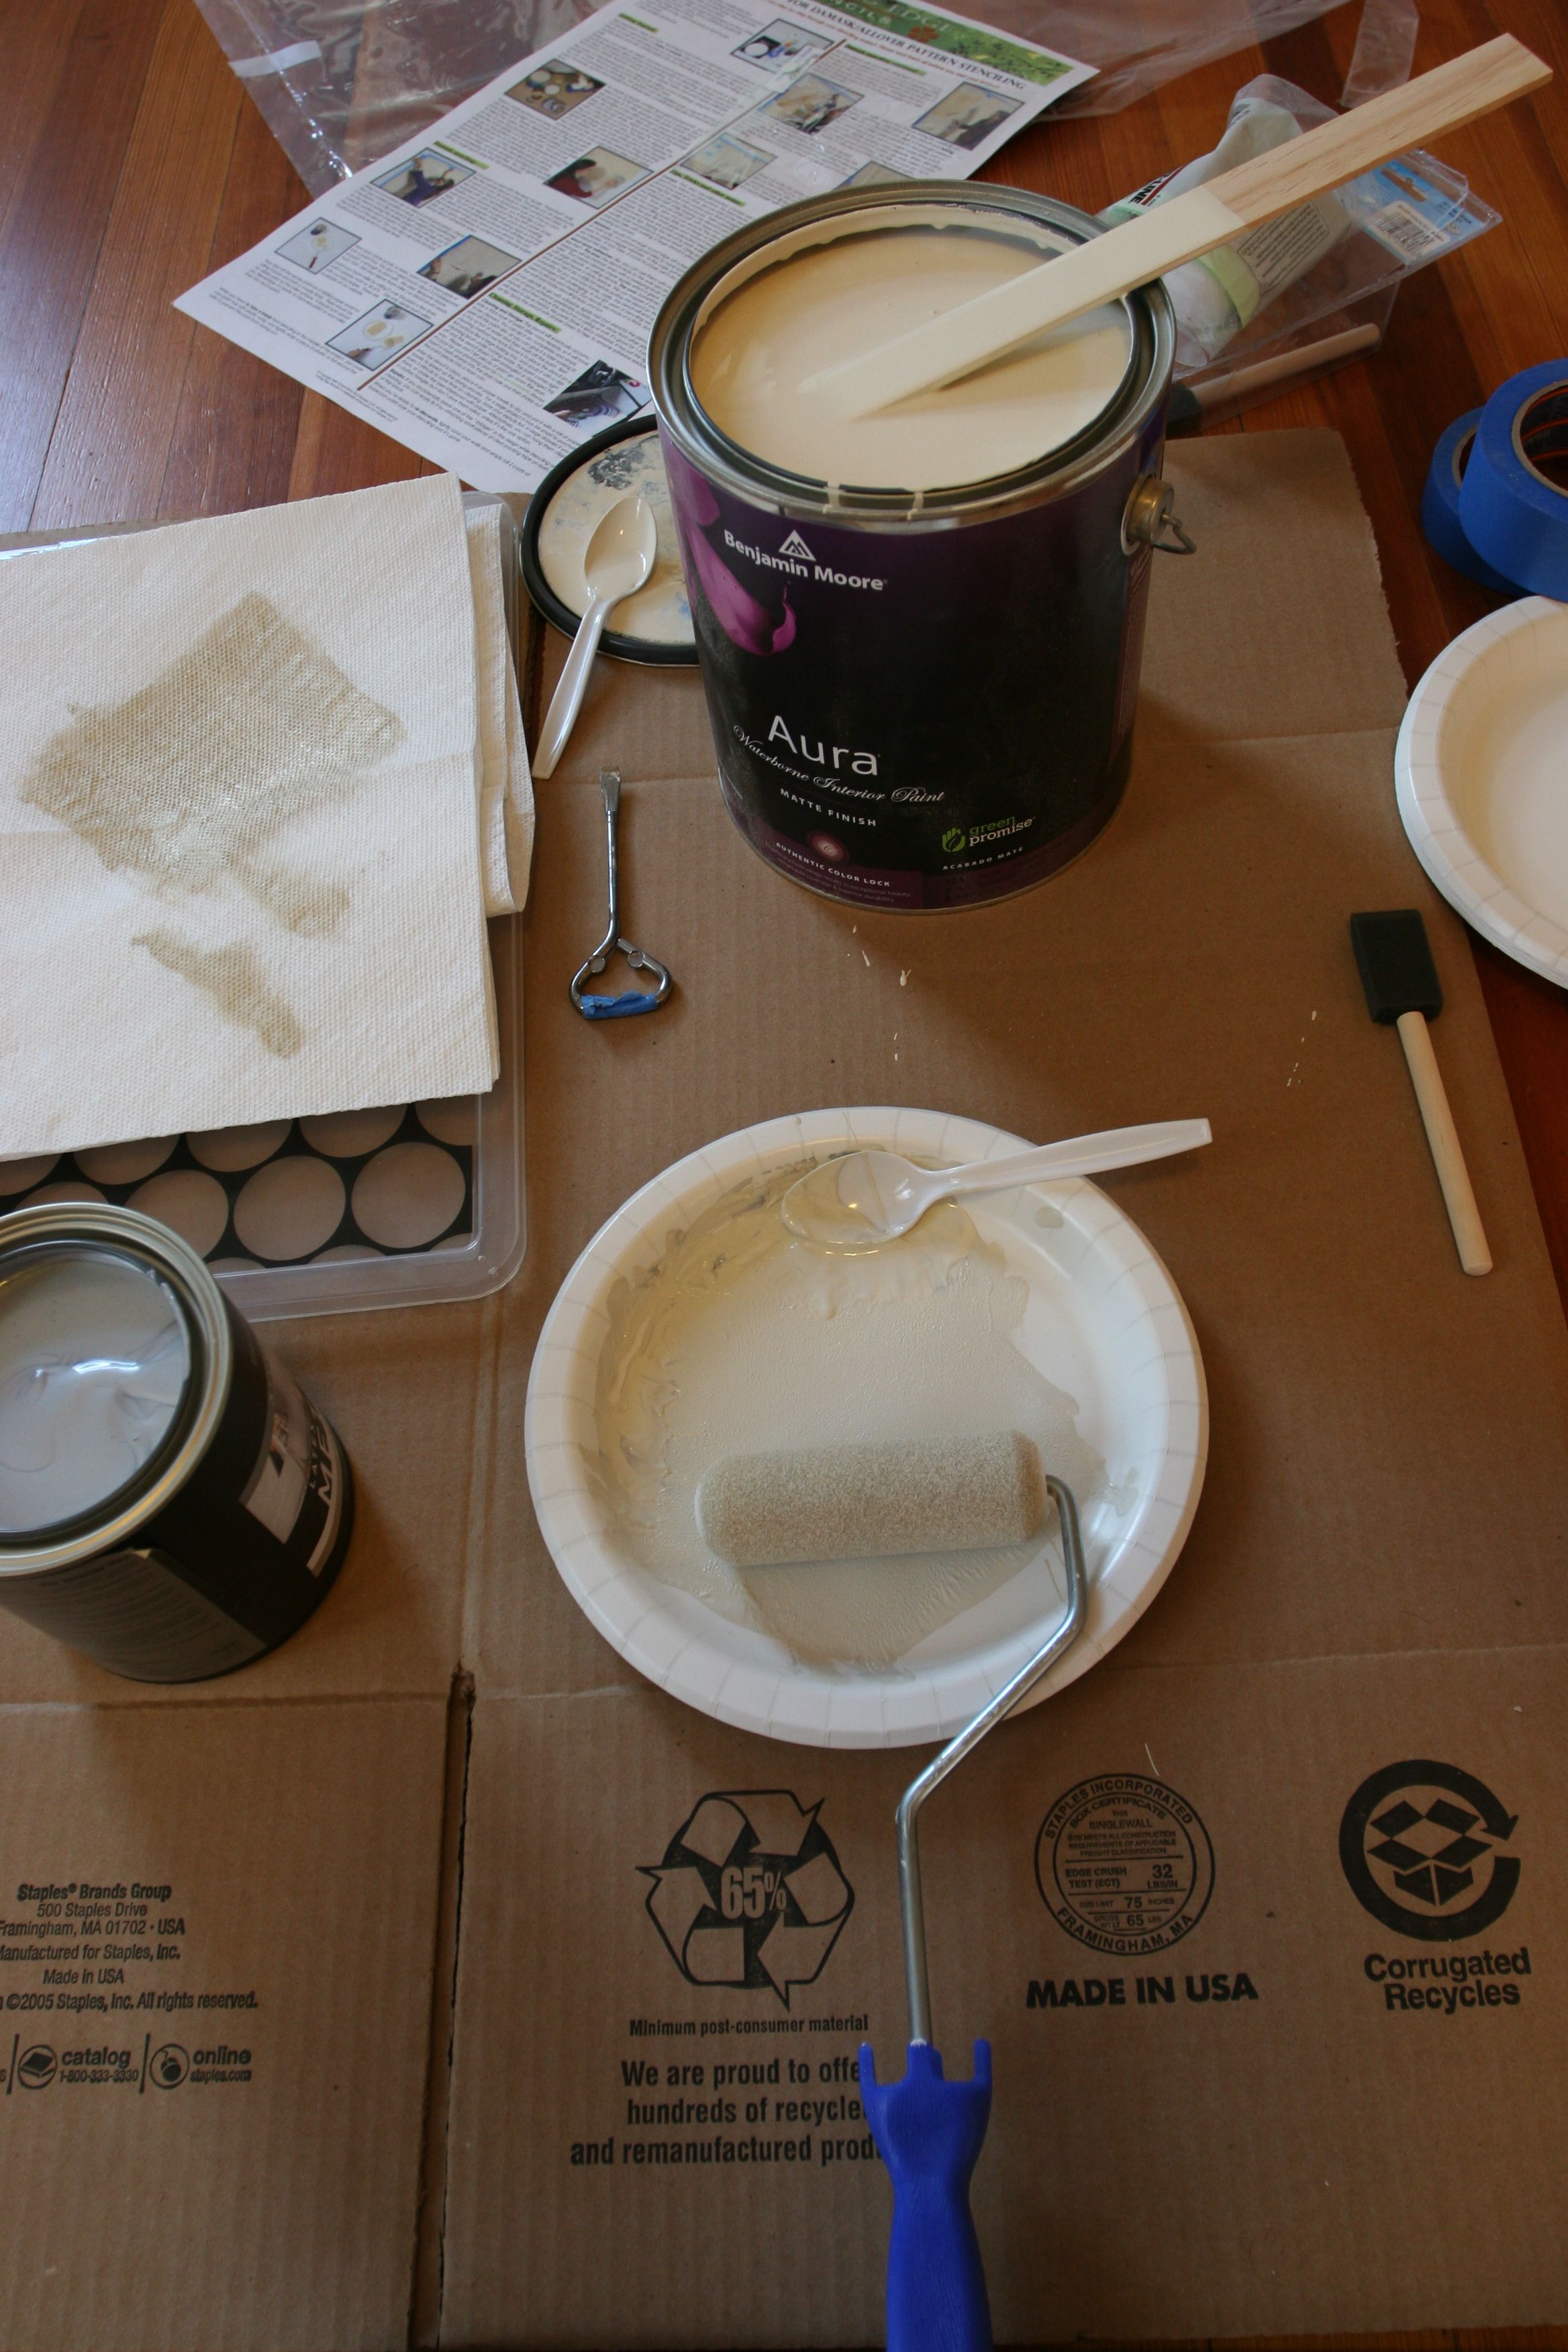 My palette was a paper plate. The instructions provided by the stencil maker were so easy to follow. It totally worked.